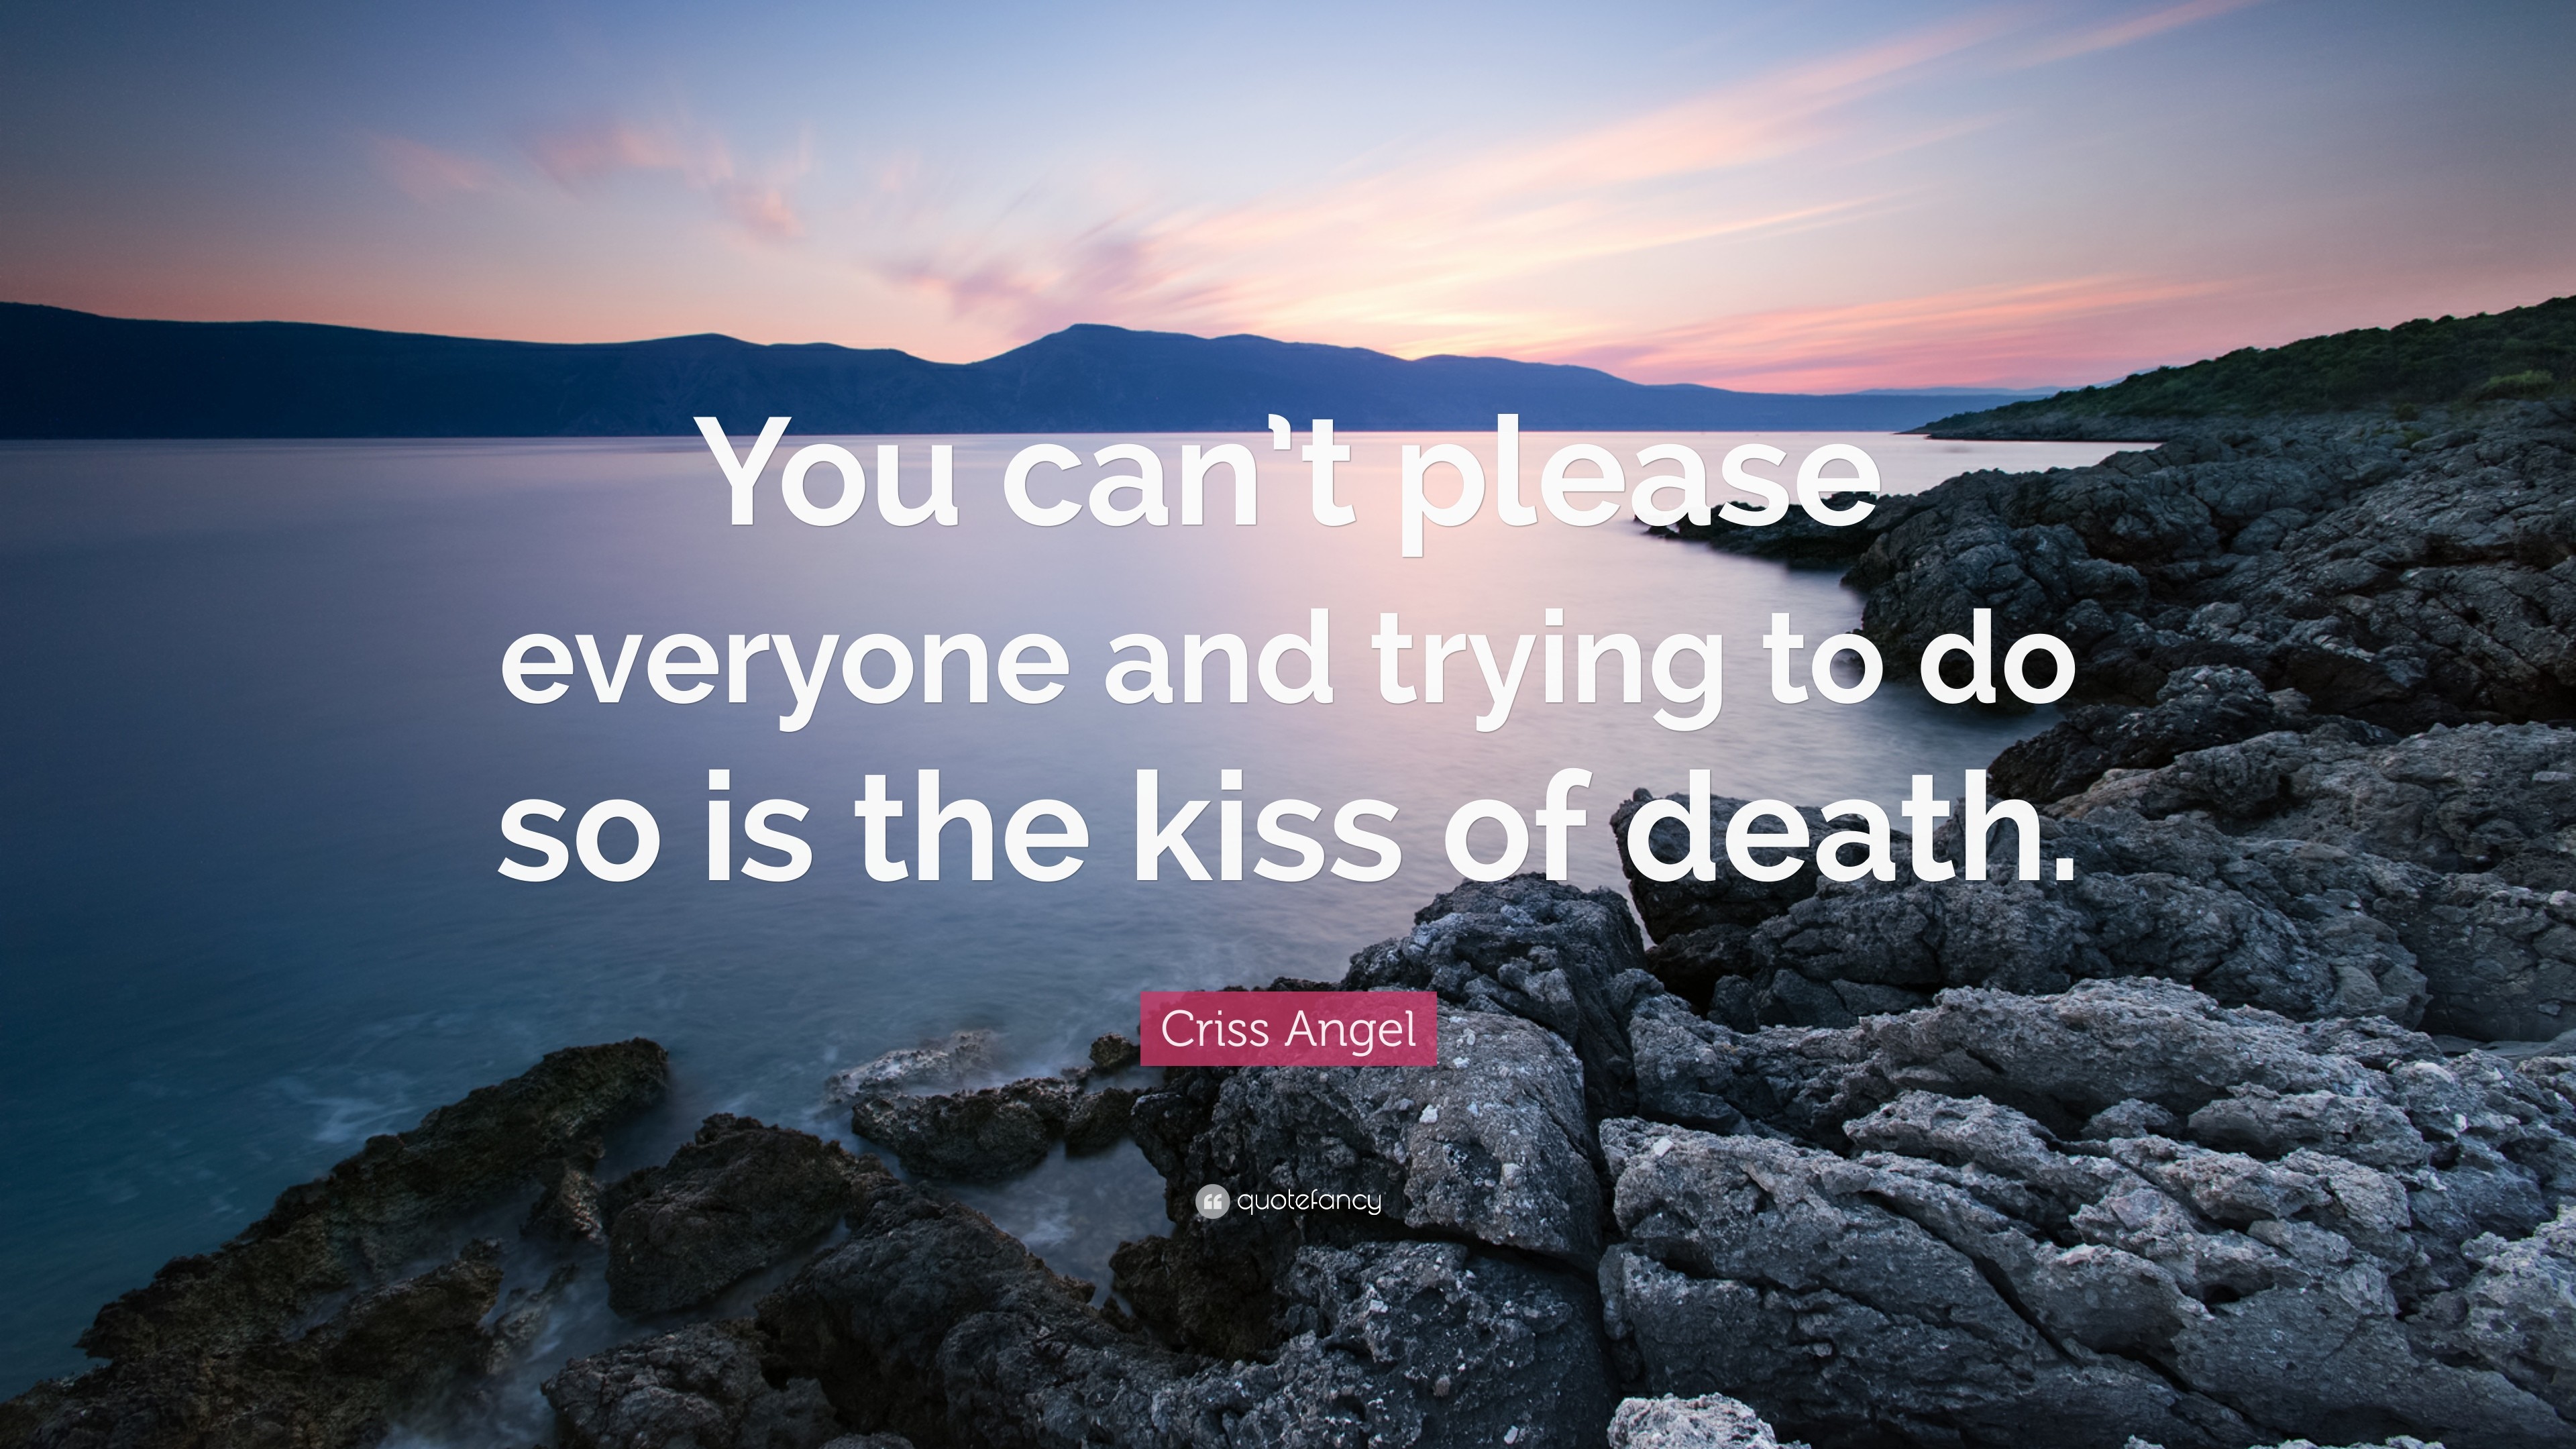 3840x2160 Criss Angel Quote: “You can't please everyone and trying to do so